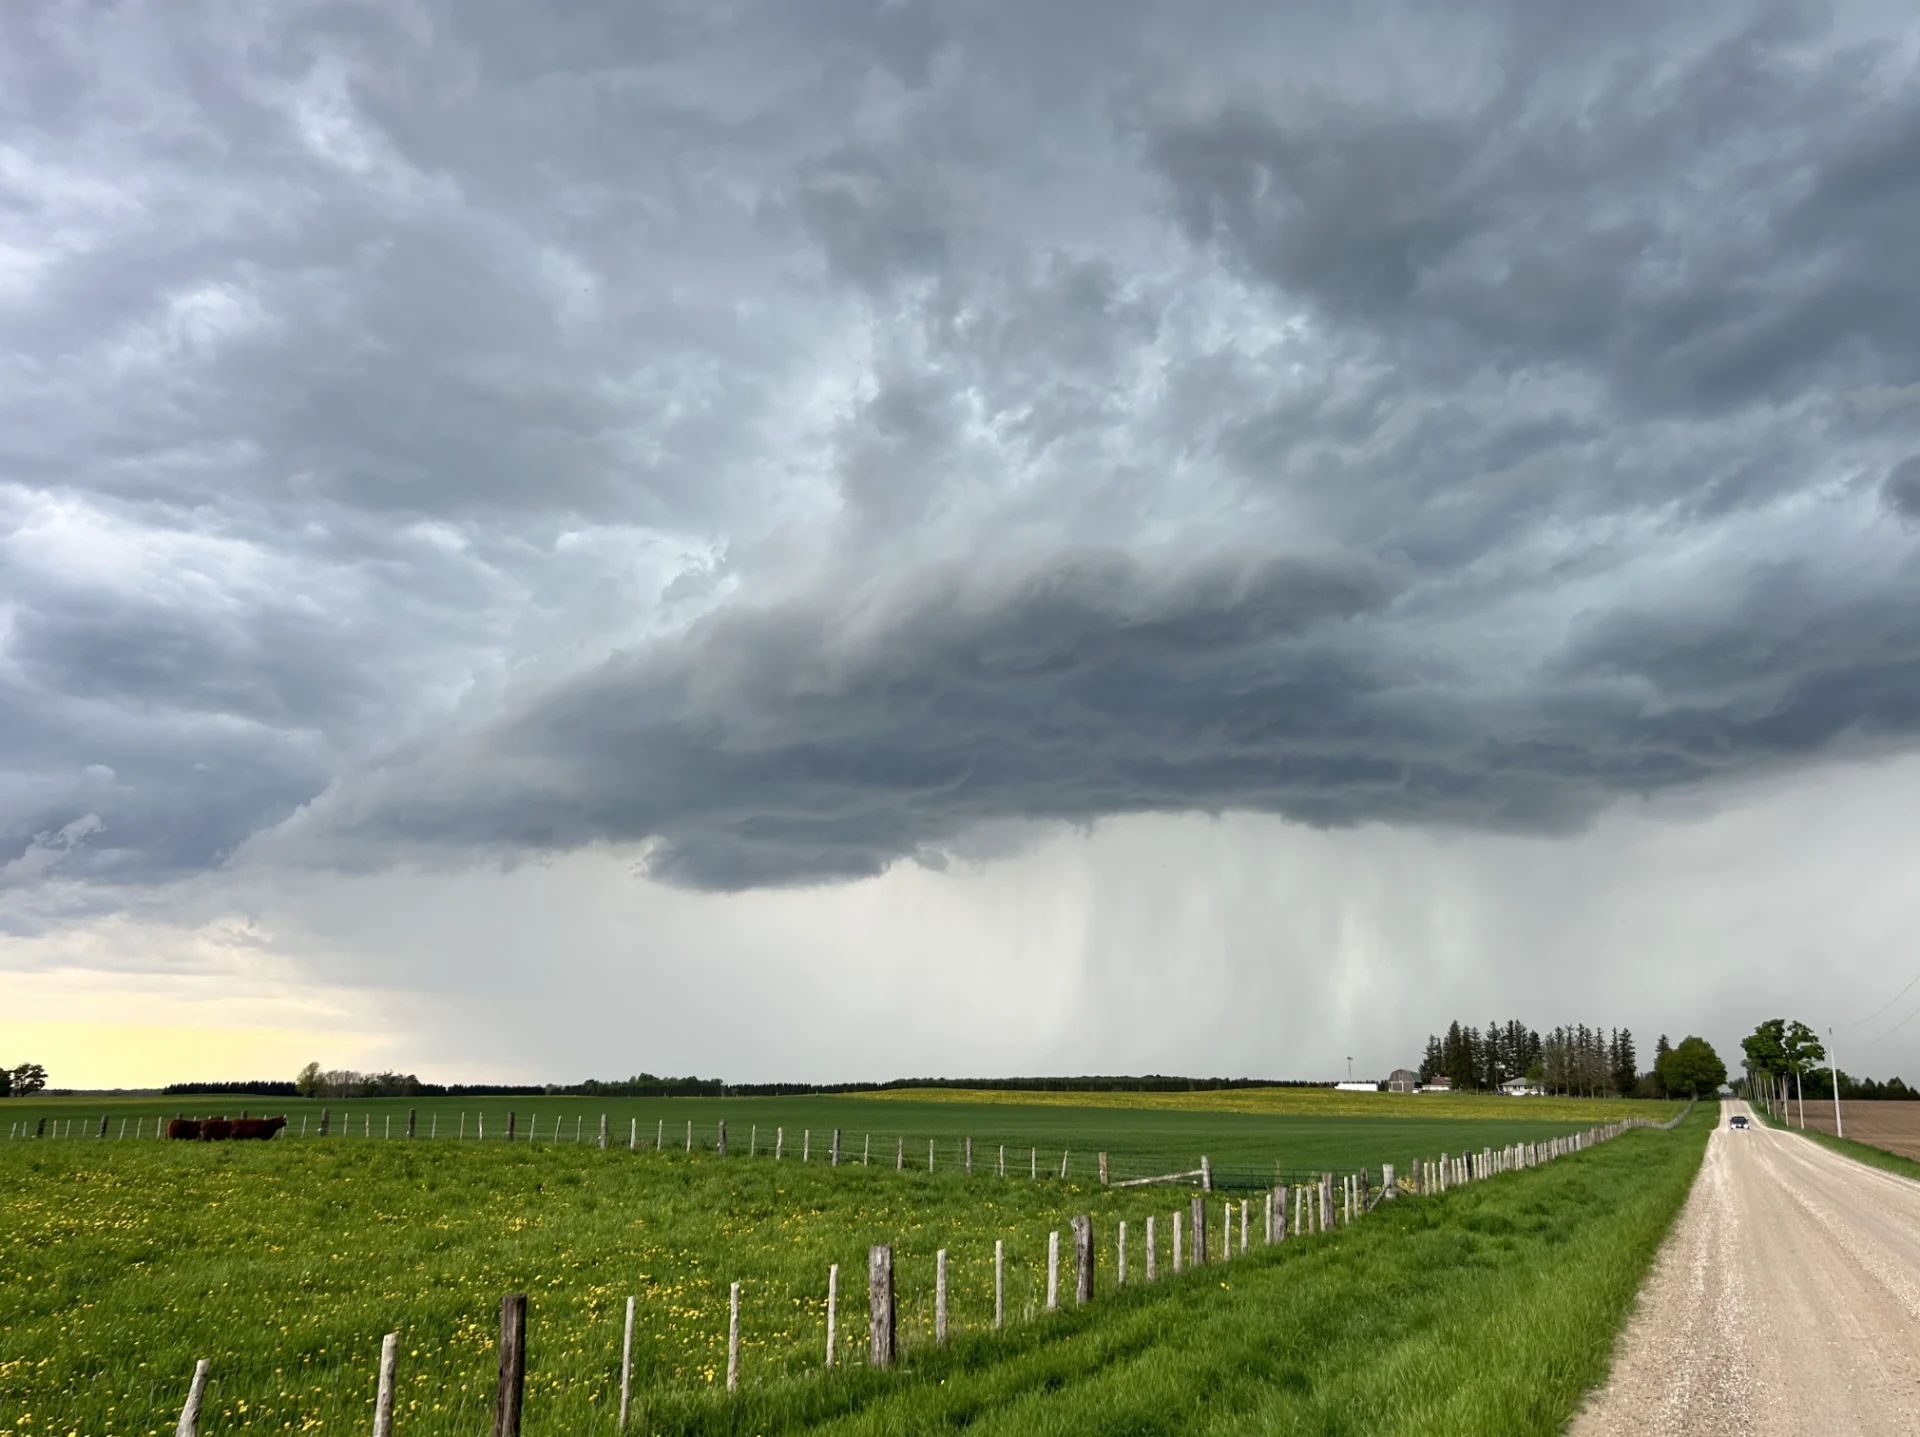 Ingredients coming together for severe weather in Ontario, Quebec